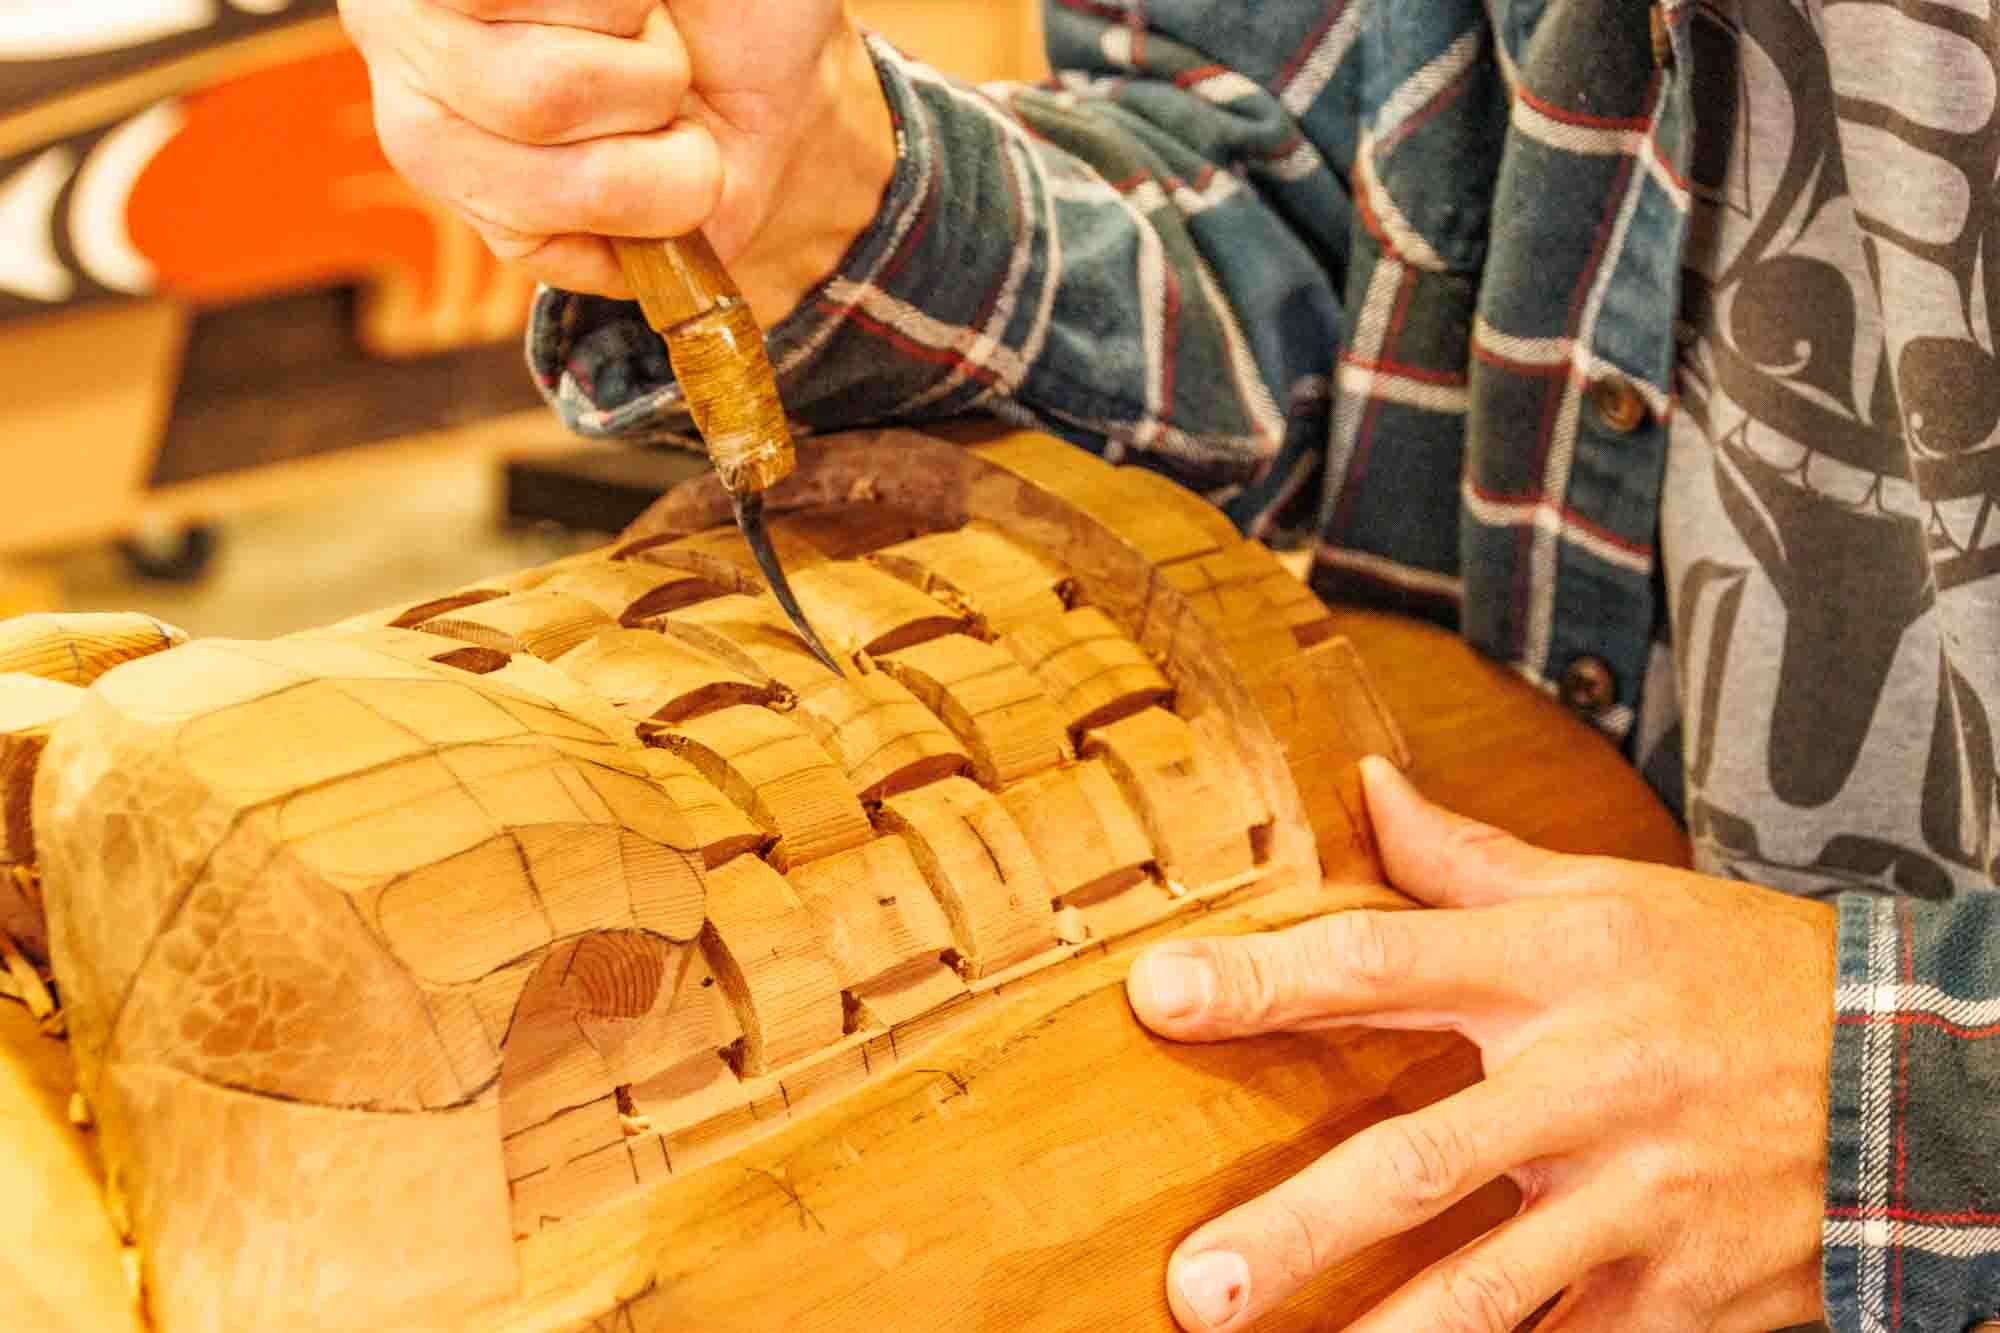 Carving the "basket" front